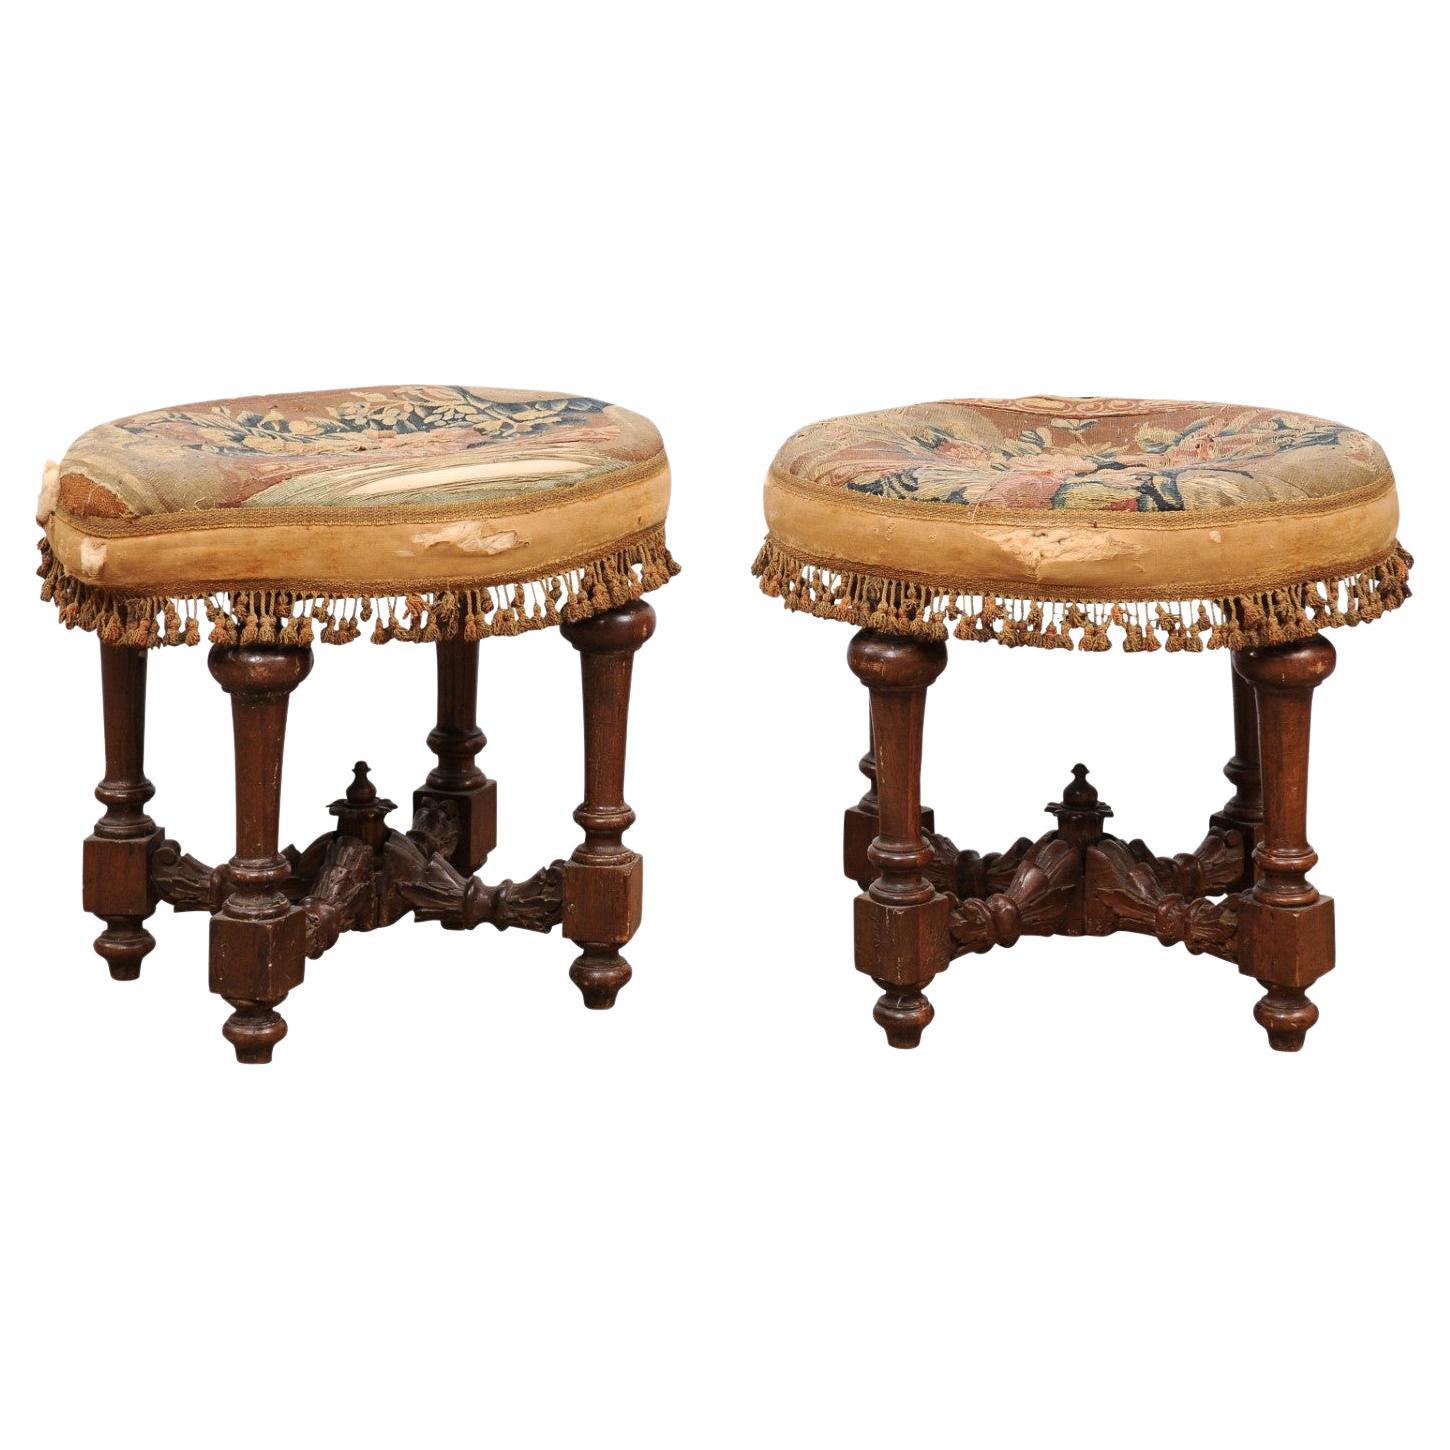 Pair of Oval 18th Century Italian Walnut Benches with Turned Legs  For Sale